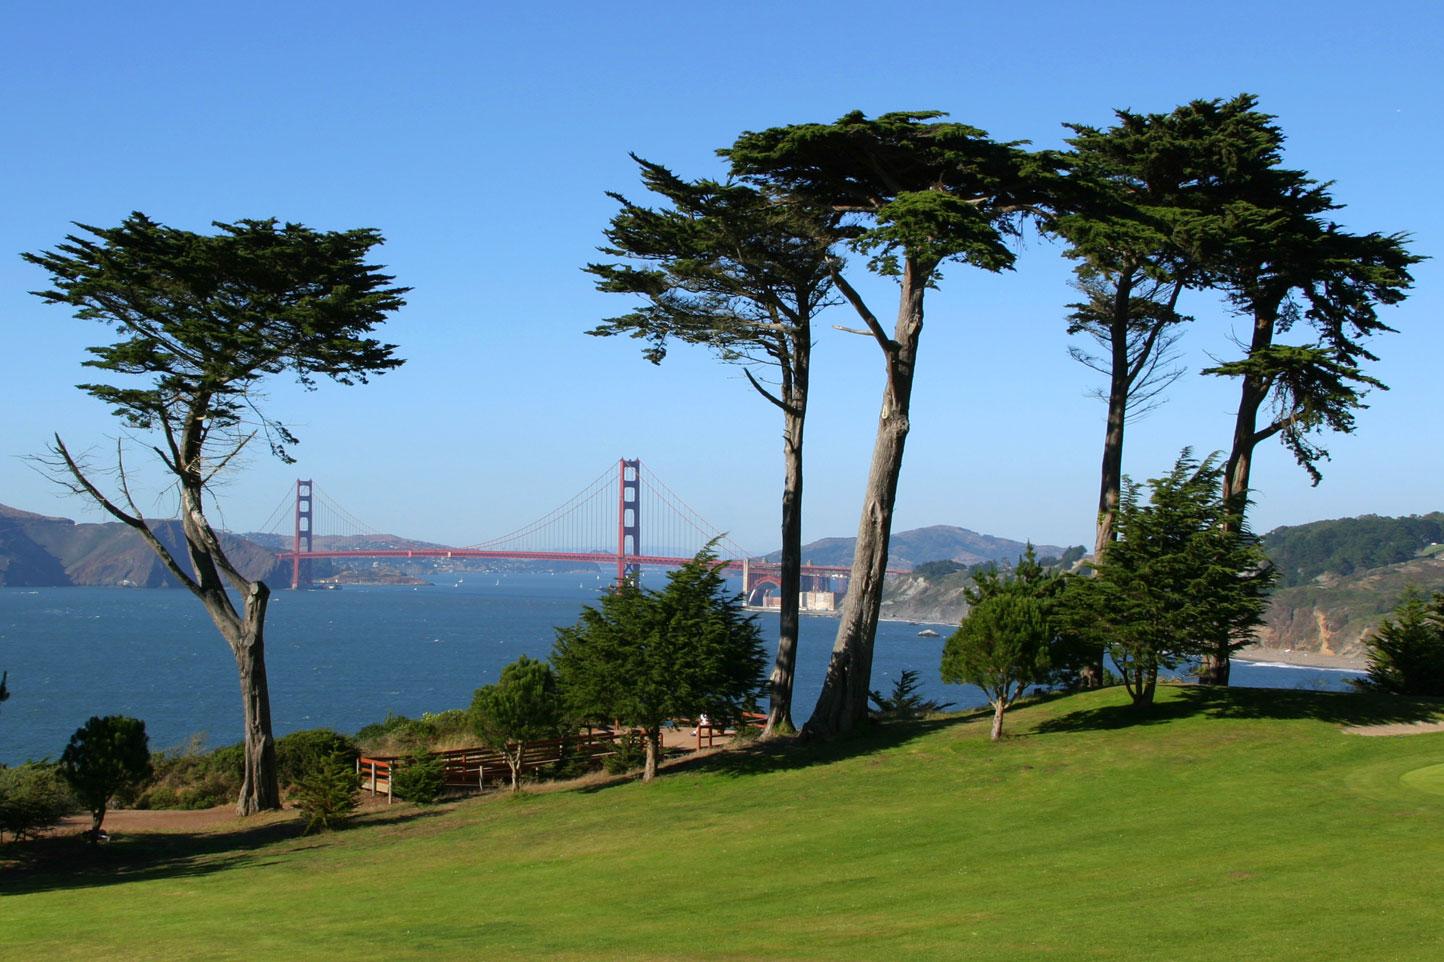 View of a golf course in San Francisco city